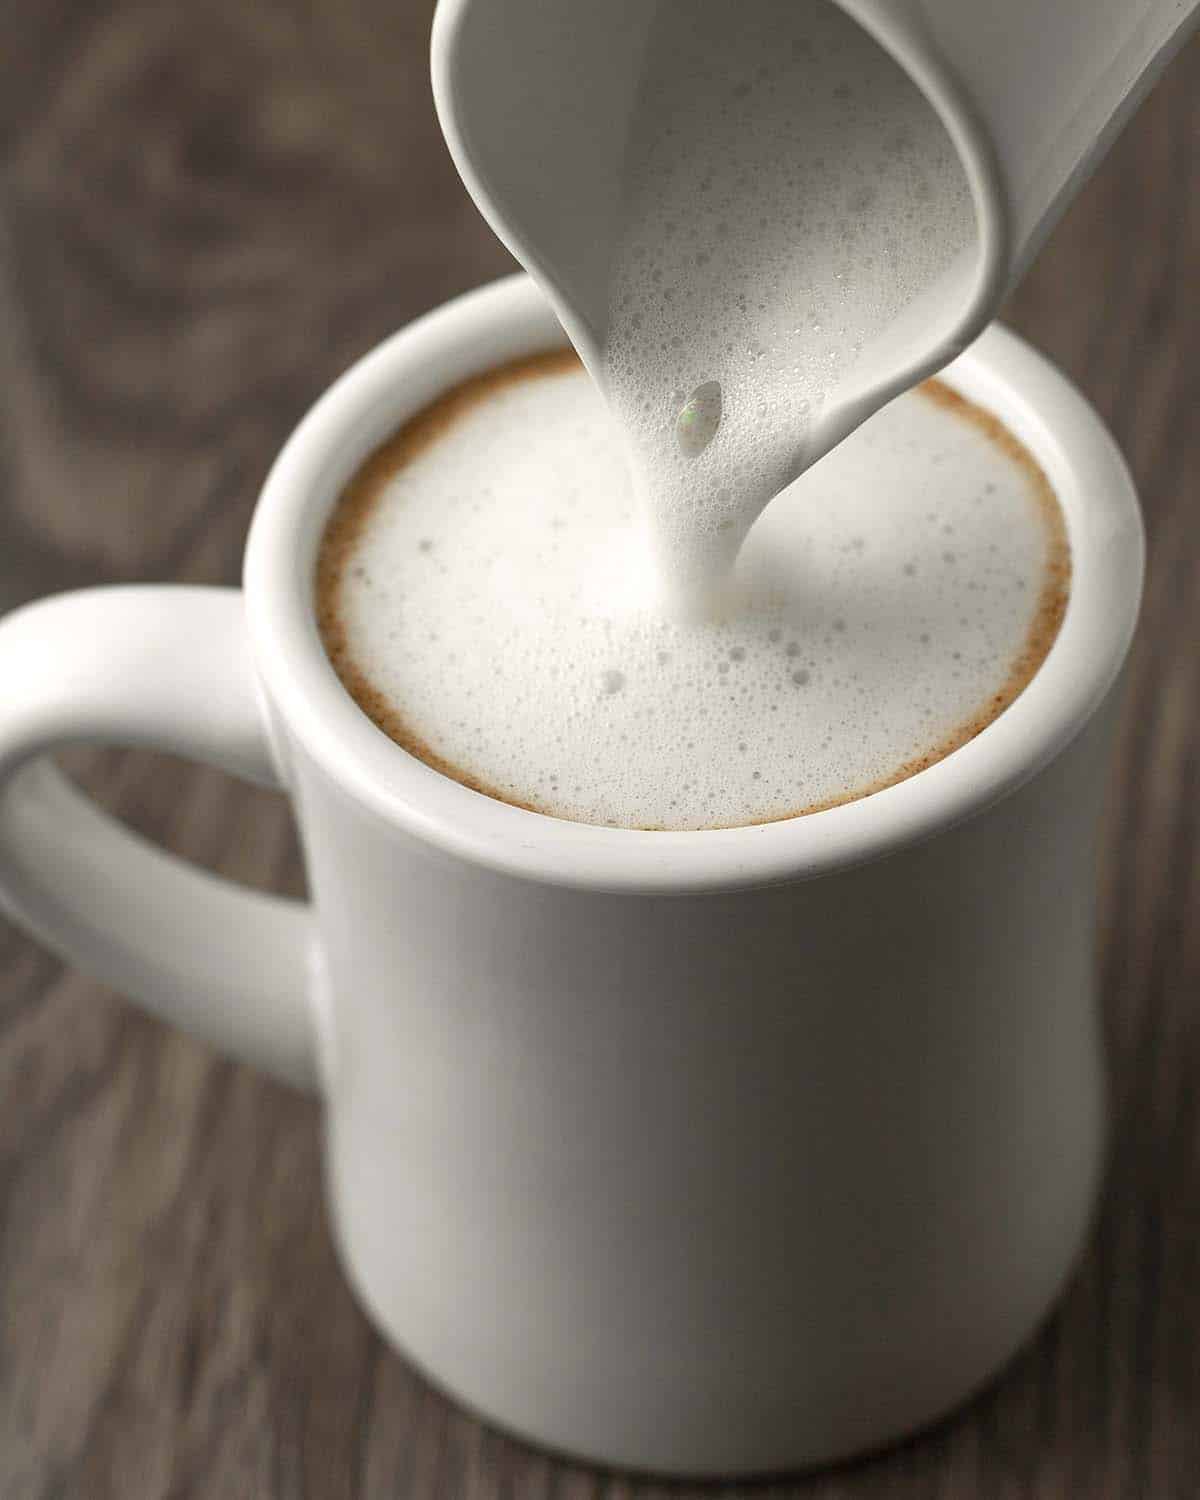 Foamed milk being poured into a mug of gingerbread latte.